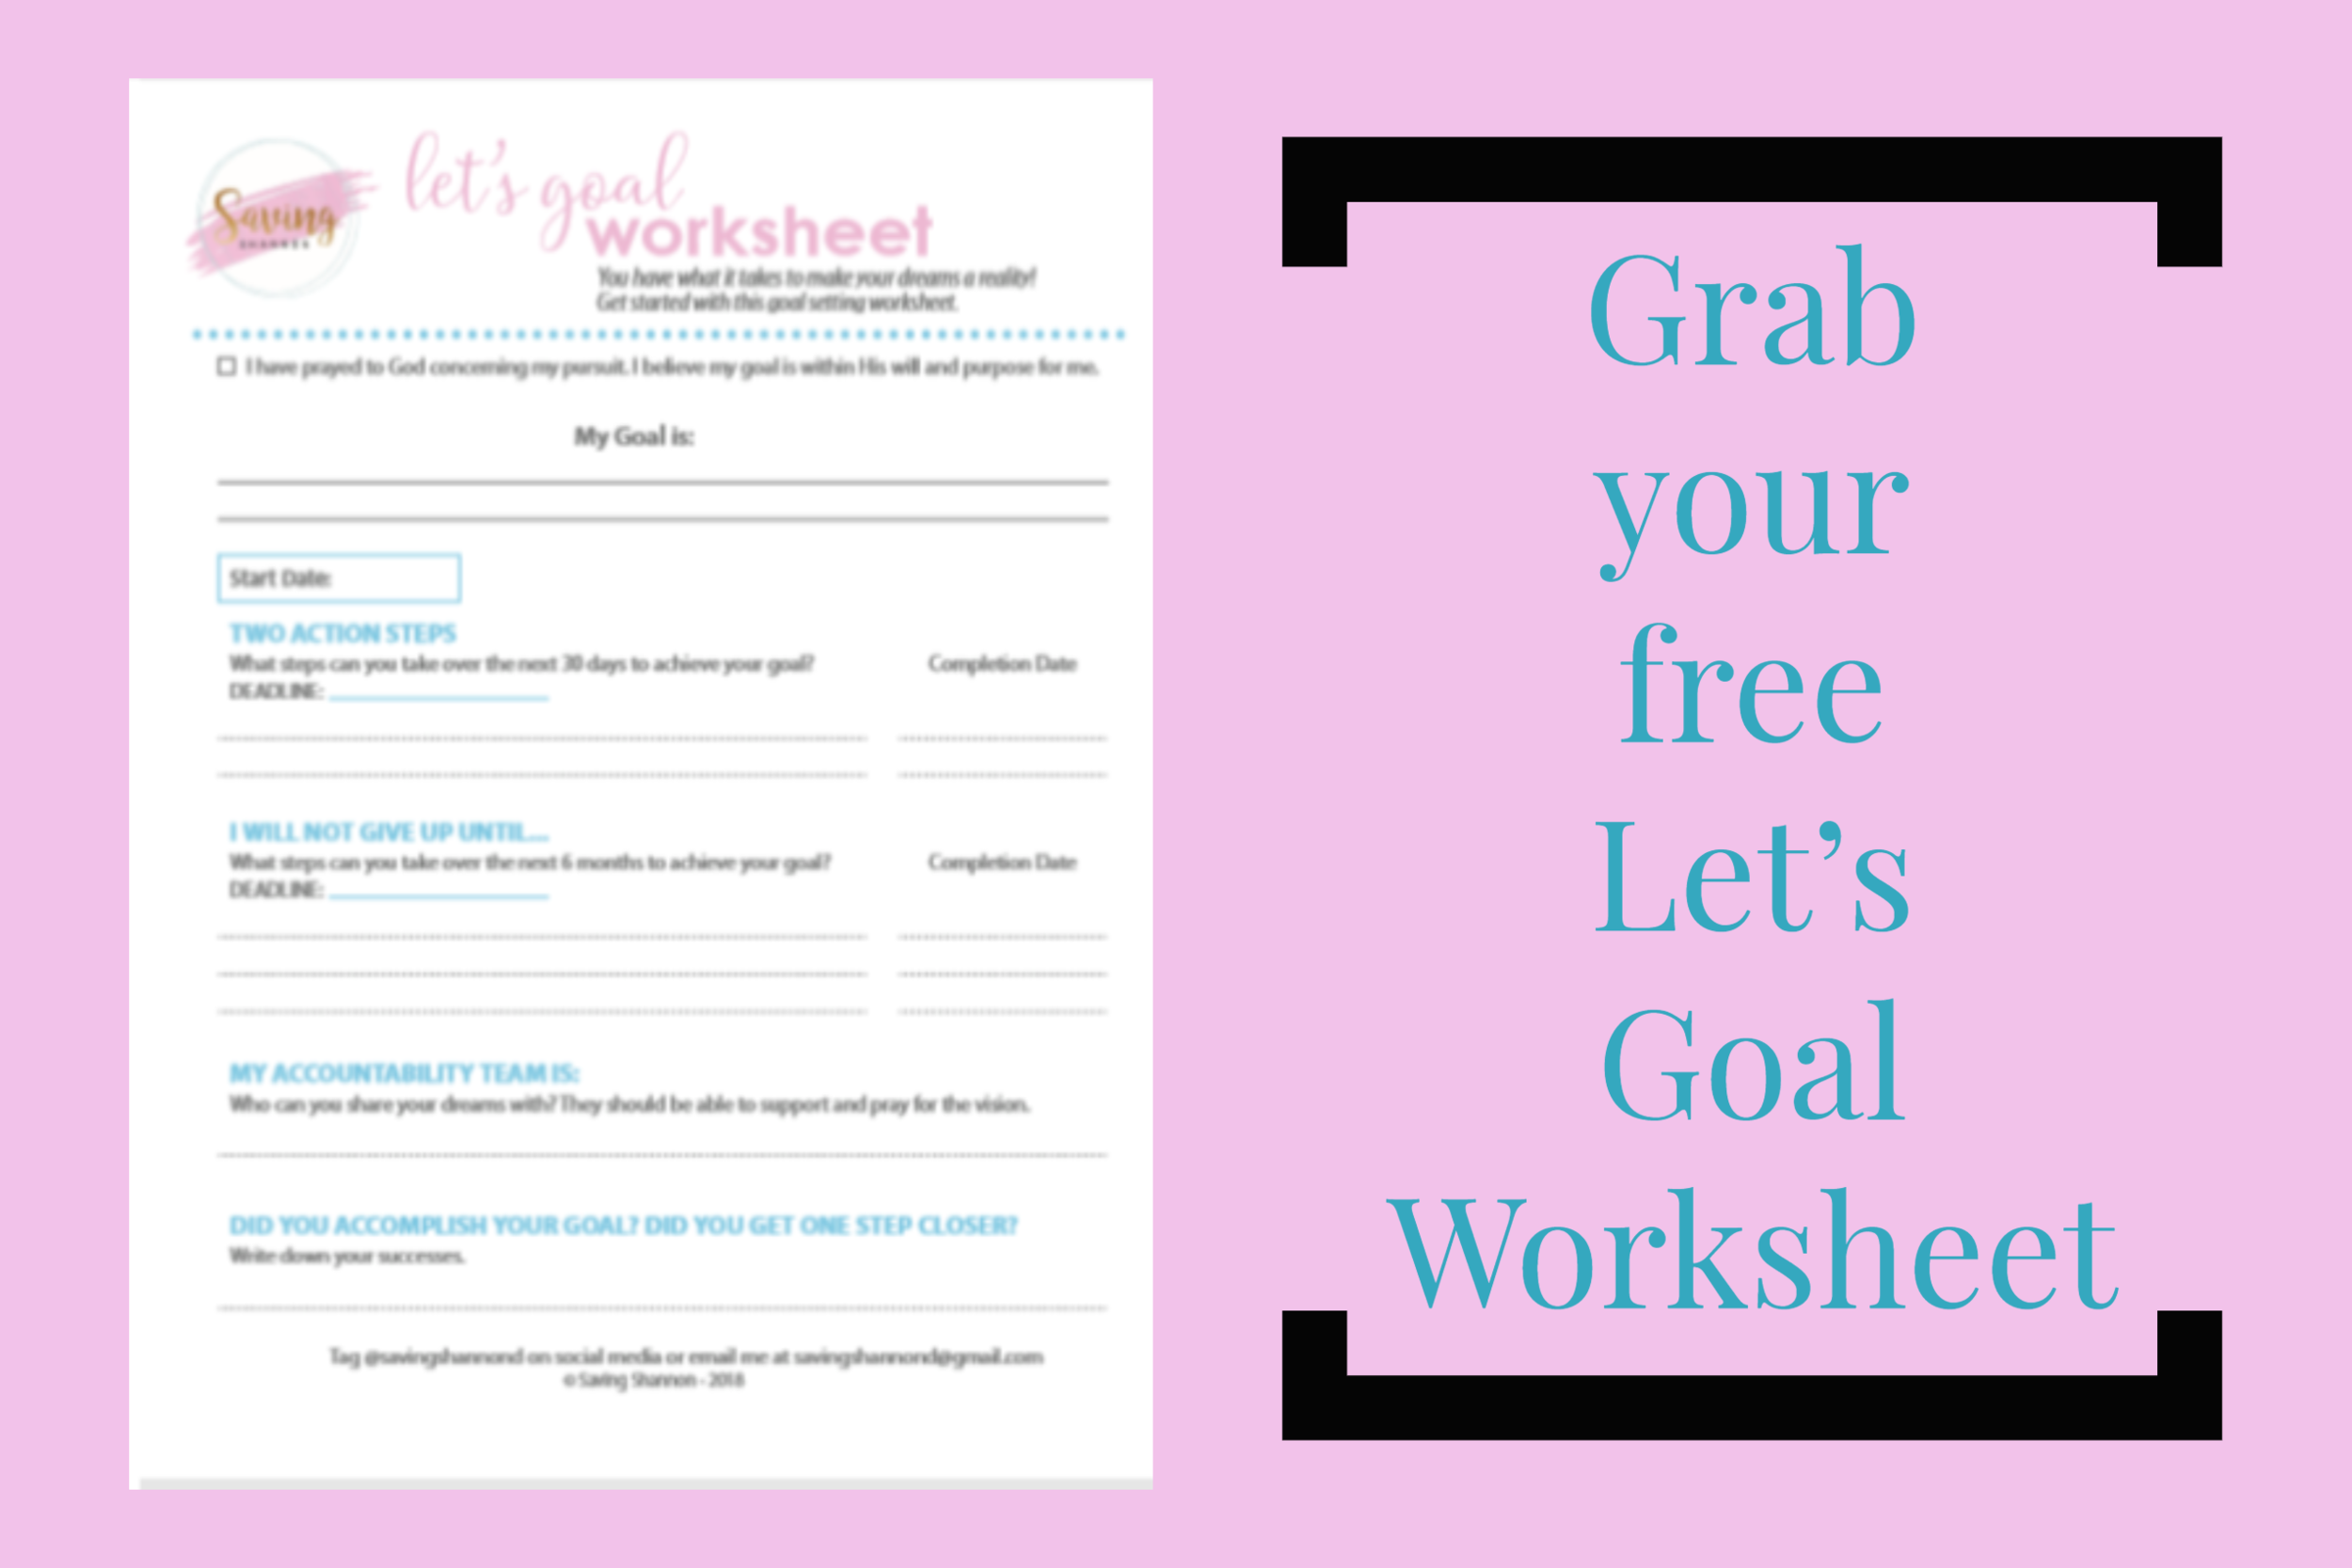 tHIS FREE RESOURCE WILL HELP YOU STAY ON TRACK WITH YOUR GOALS.